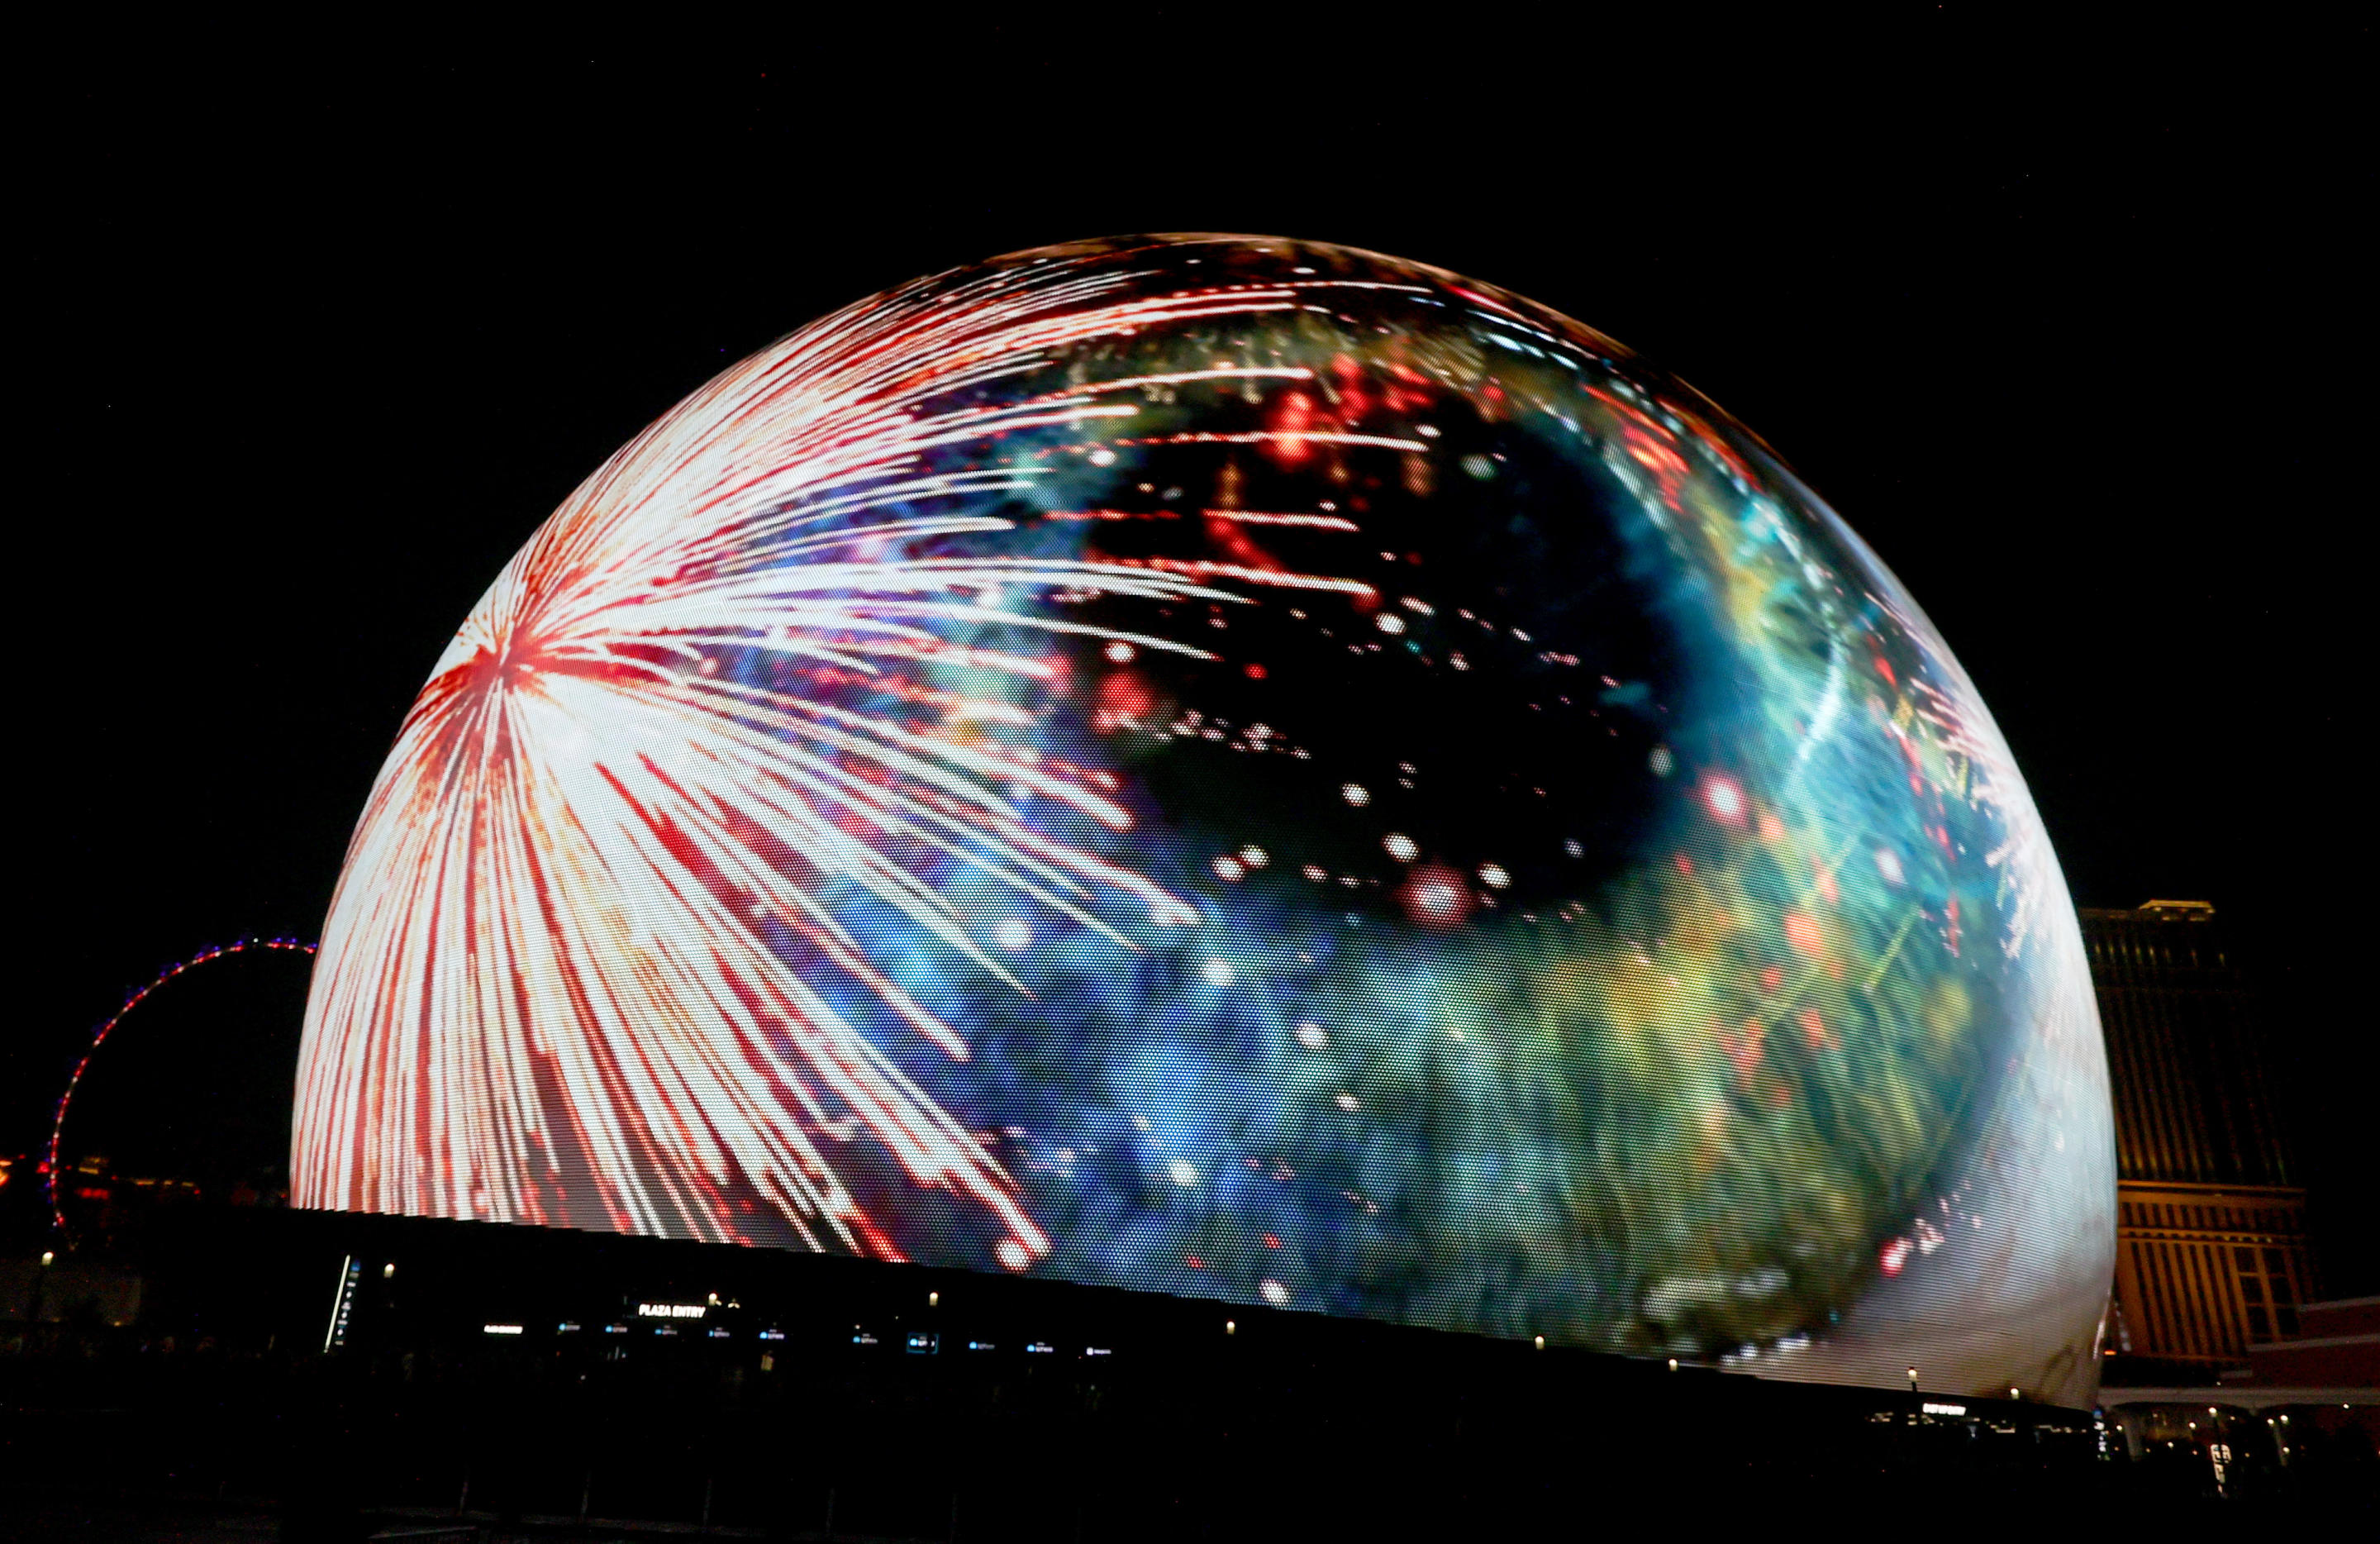 An image of a human eye and fireworks lights up the 580,000-square-foot Exosphere at the Sphere.